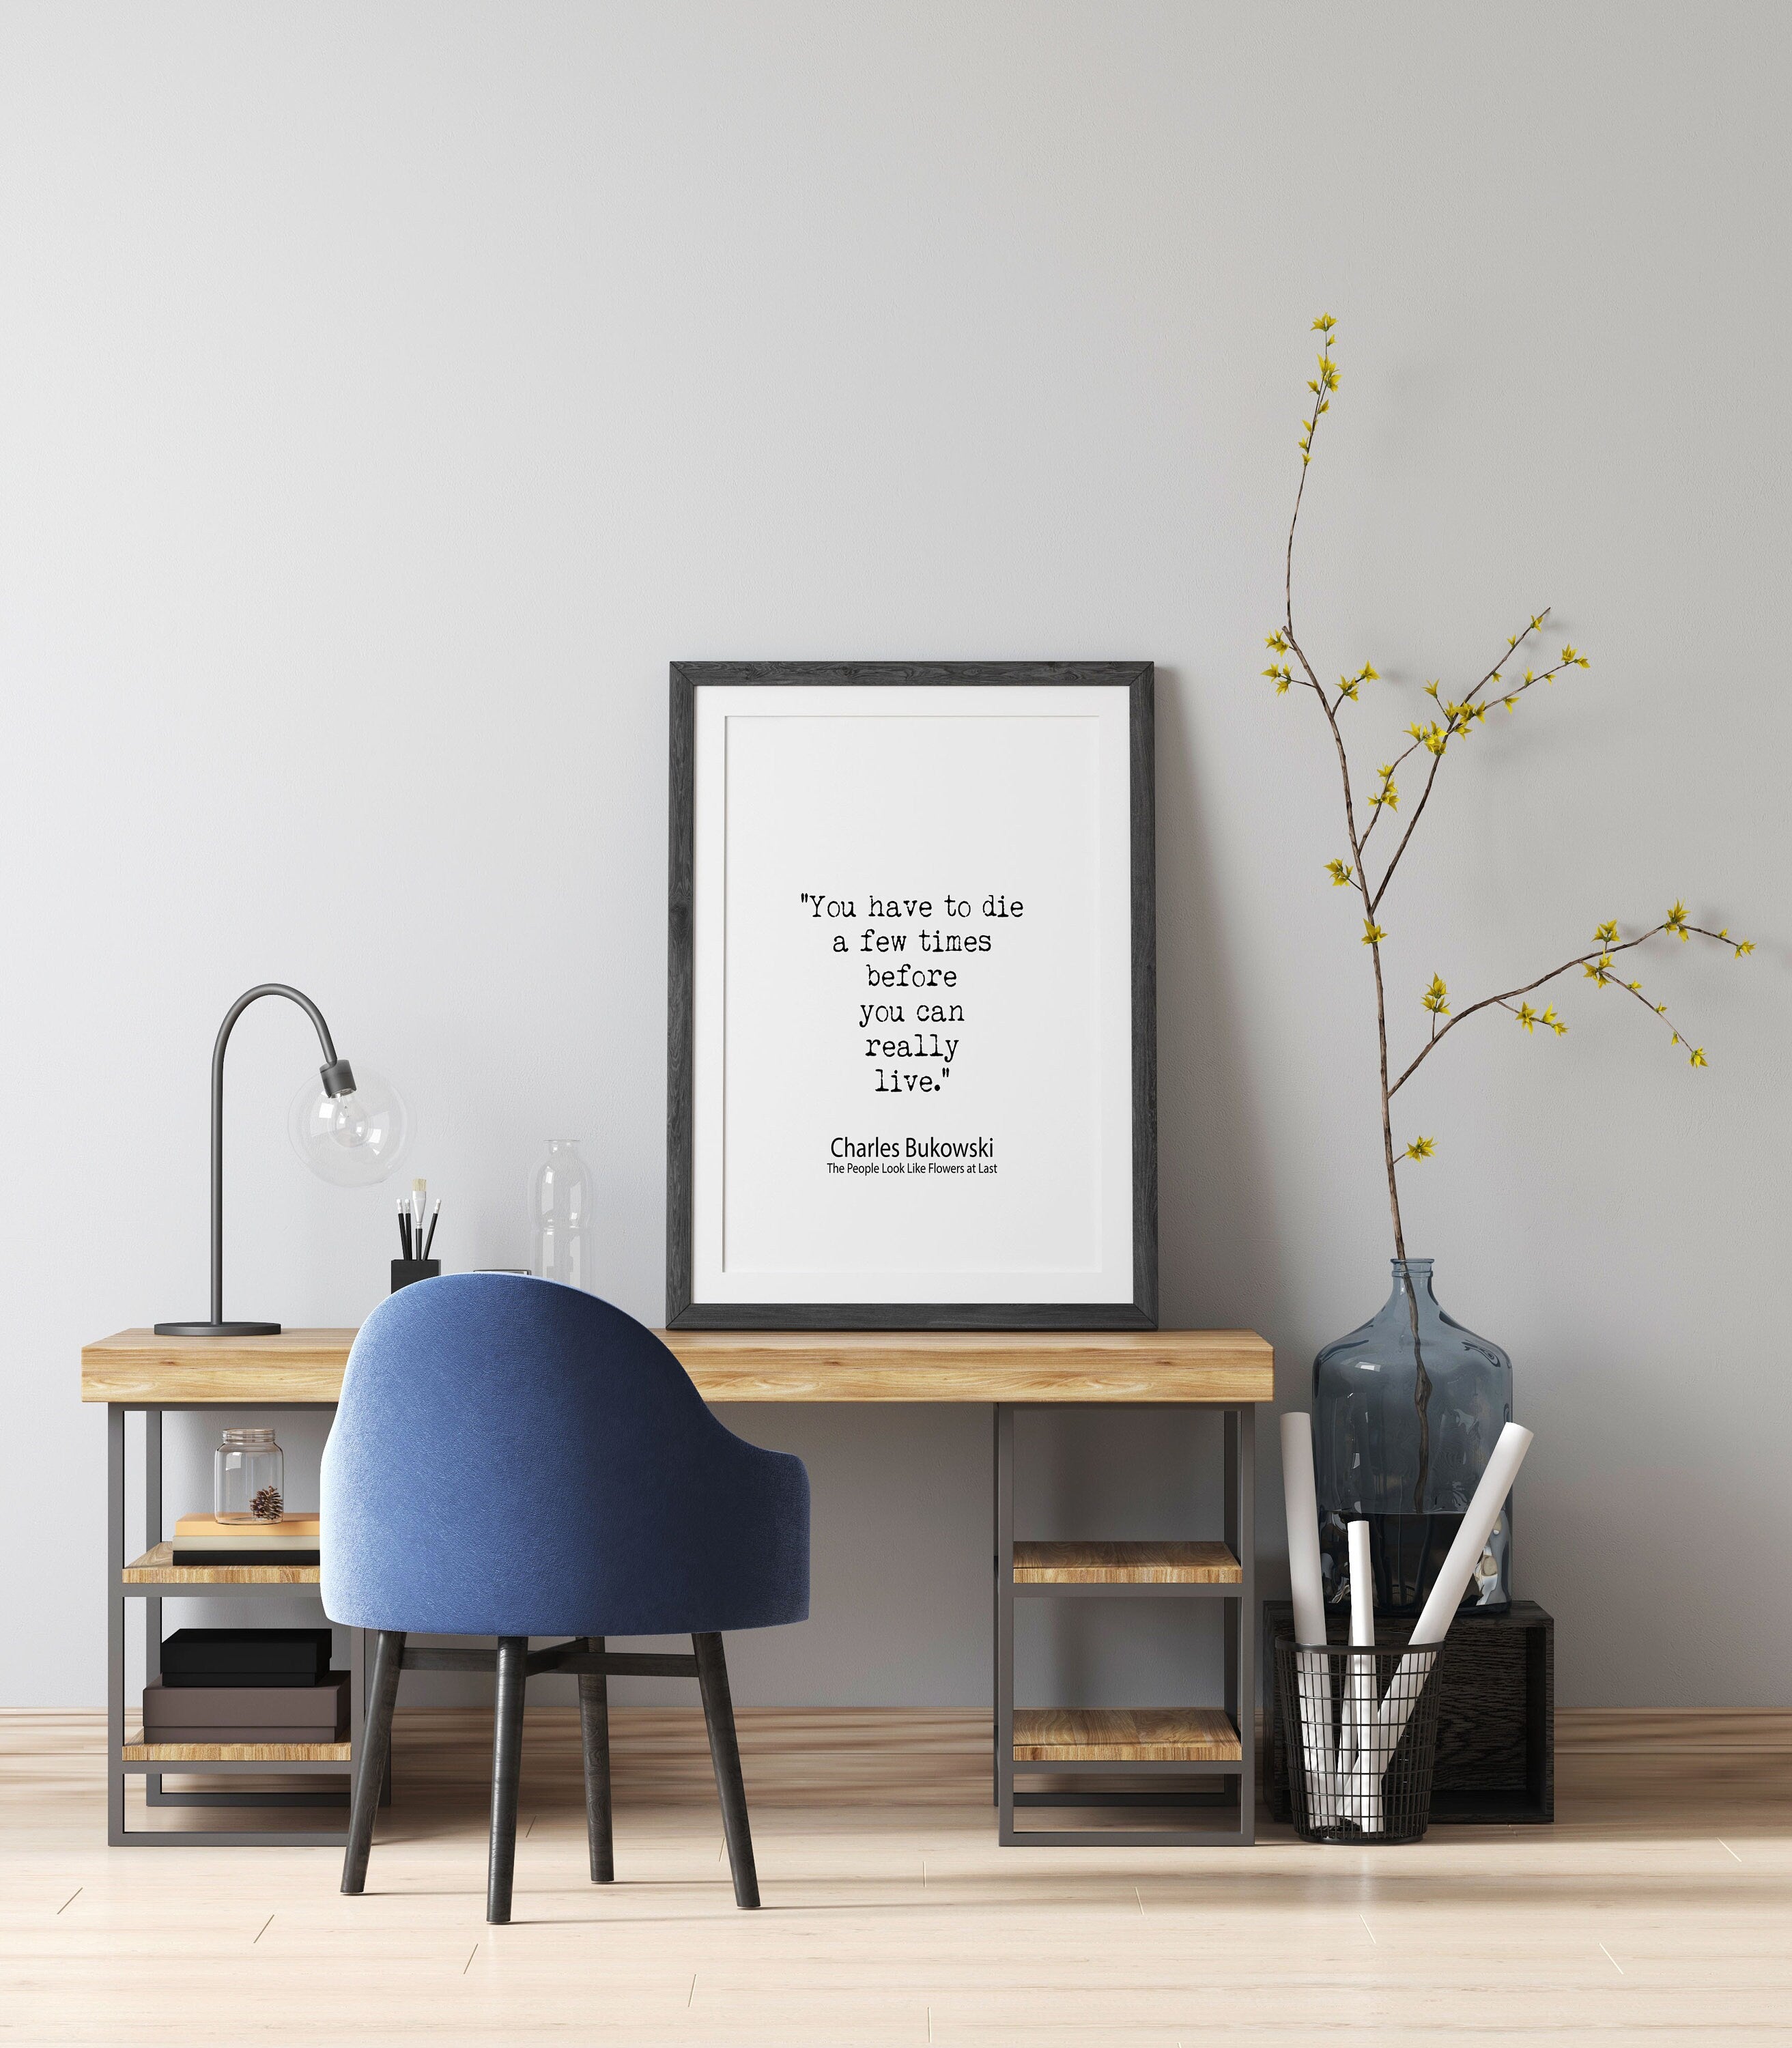 Charles Bukowski Quote Print, Minimalist Black & White Poster Art Print - "You Have To Die A Few Times Before You Can Really Live"